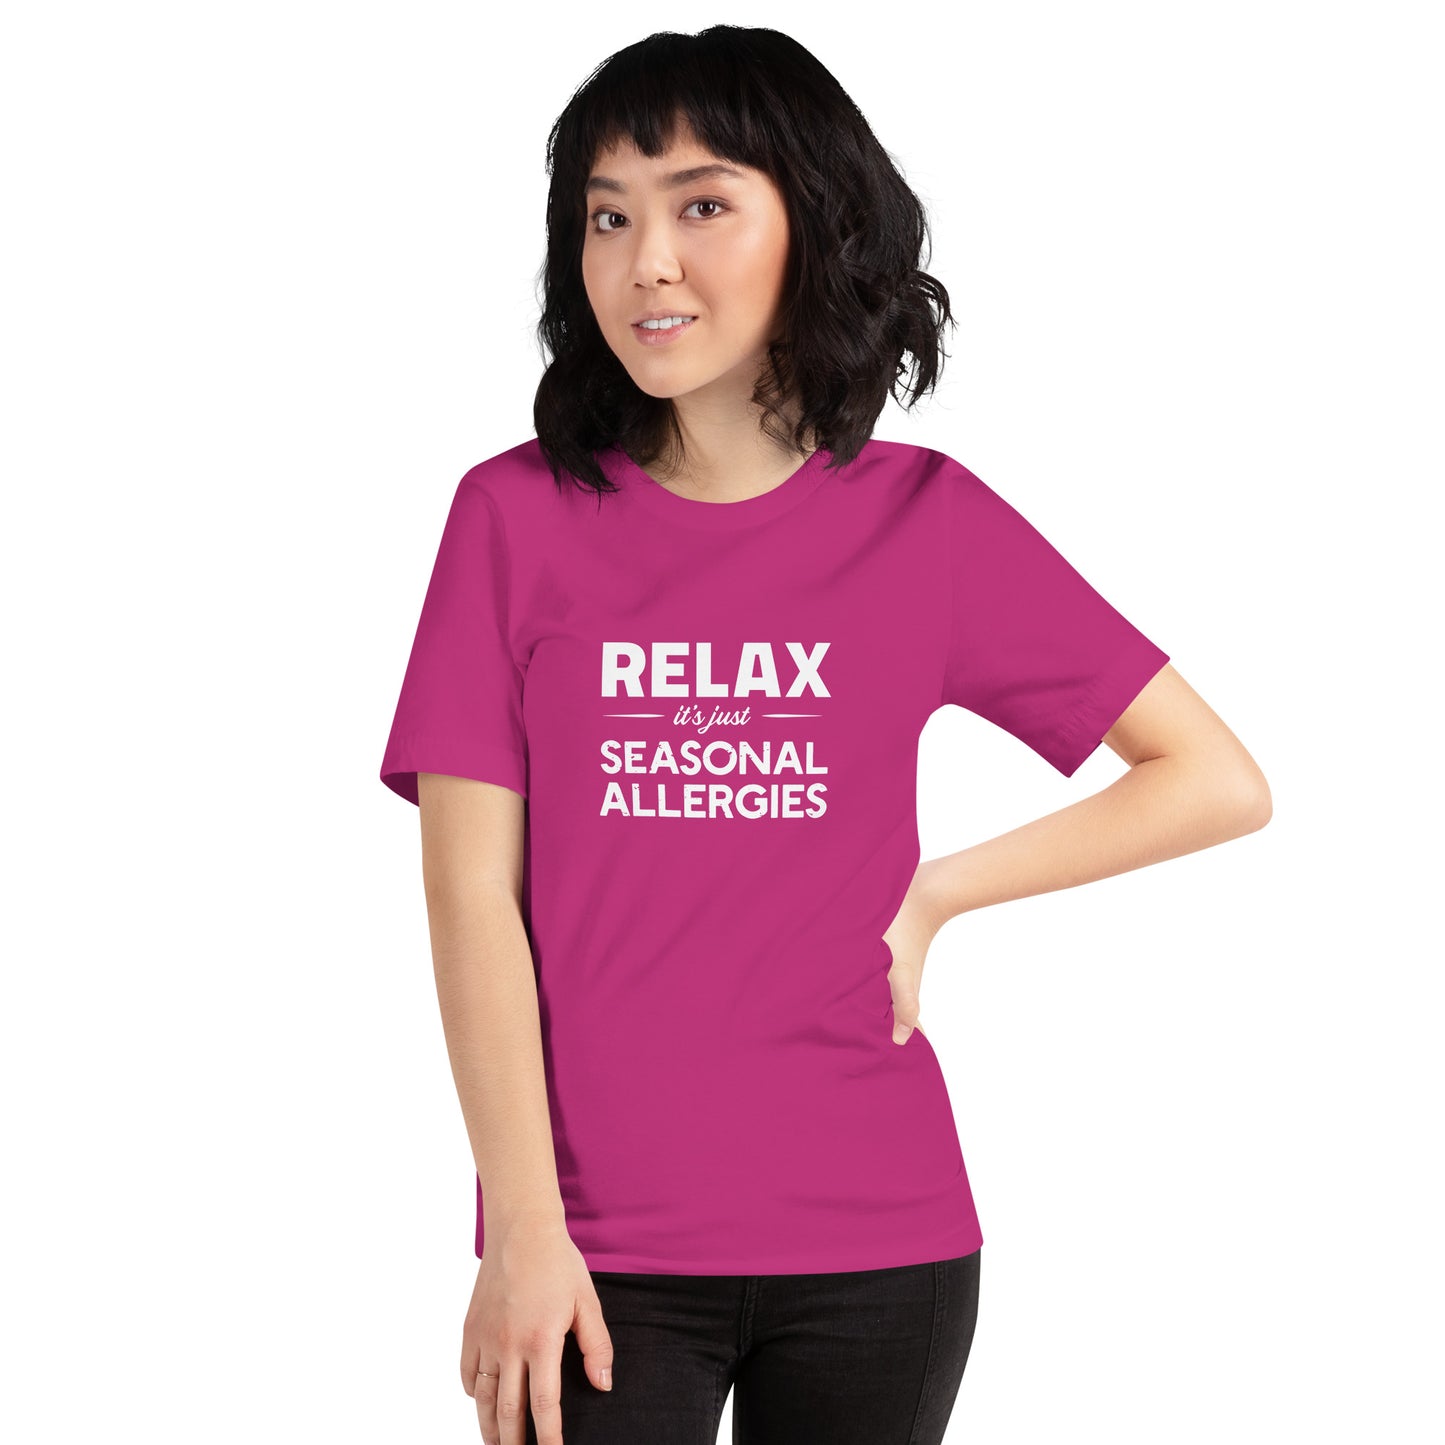 Model wearing Berry (hot pink) t-shirt with white graphic: "RELAX it's just SEASONAL ALLERGIES"